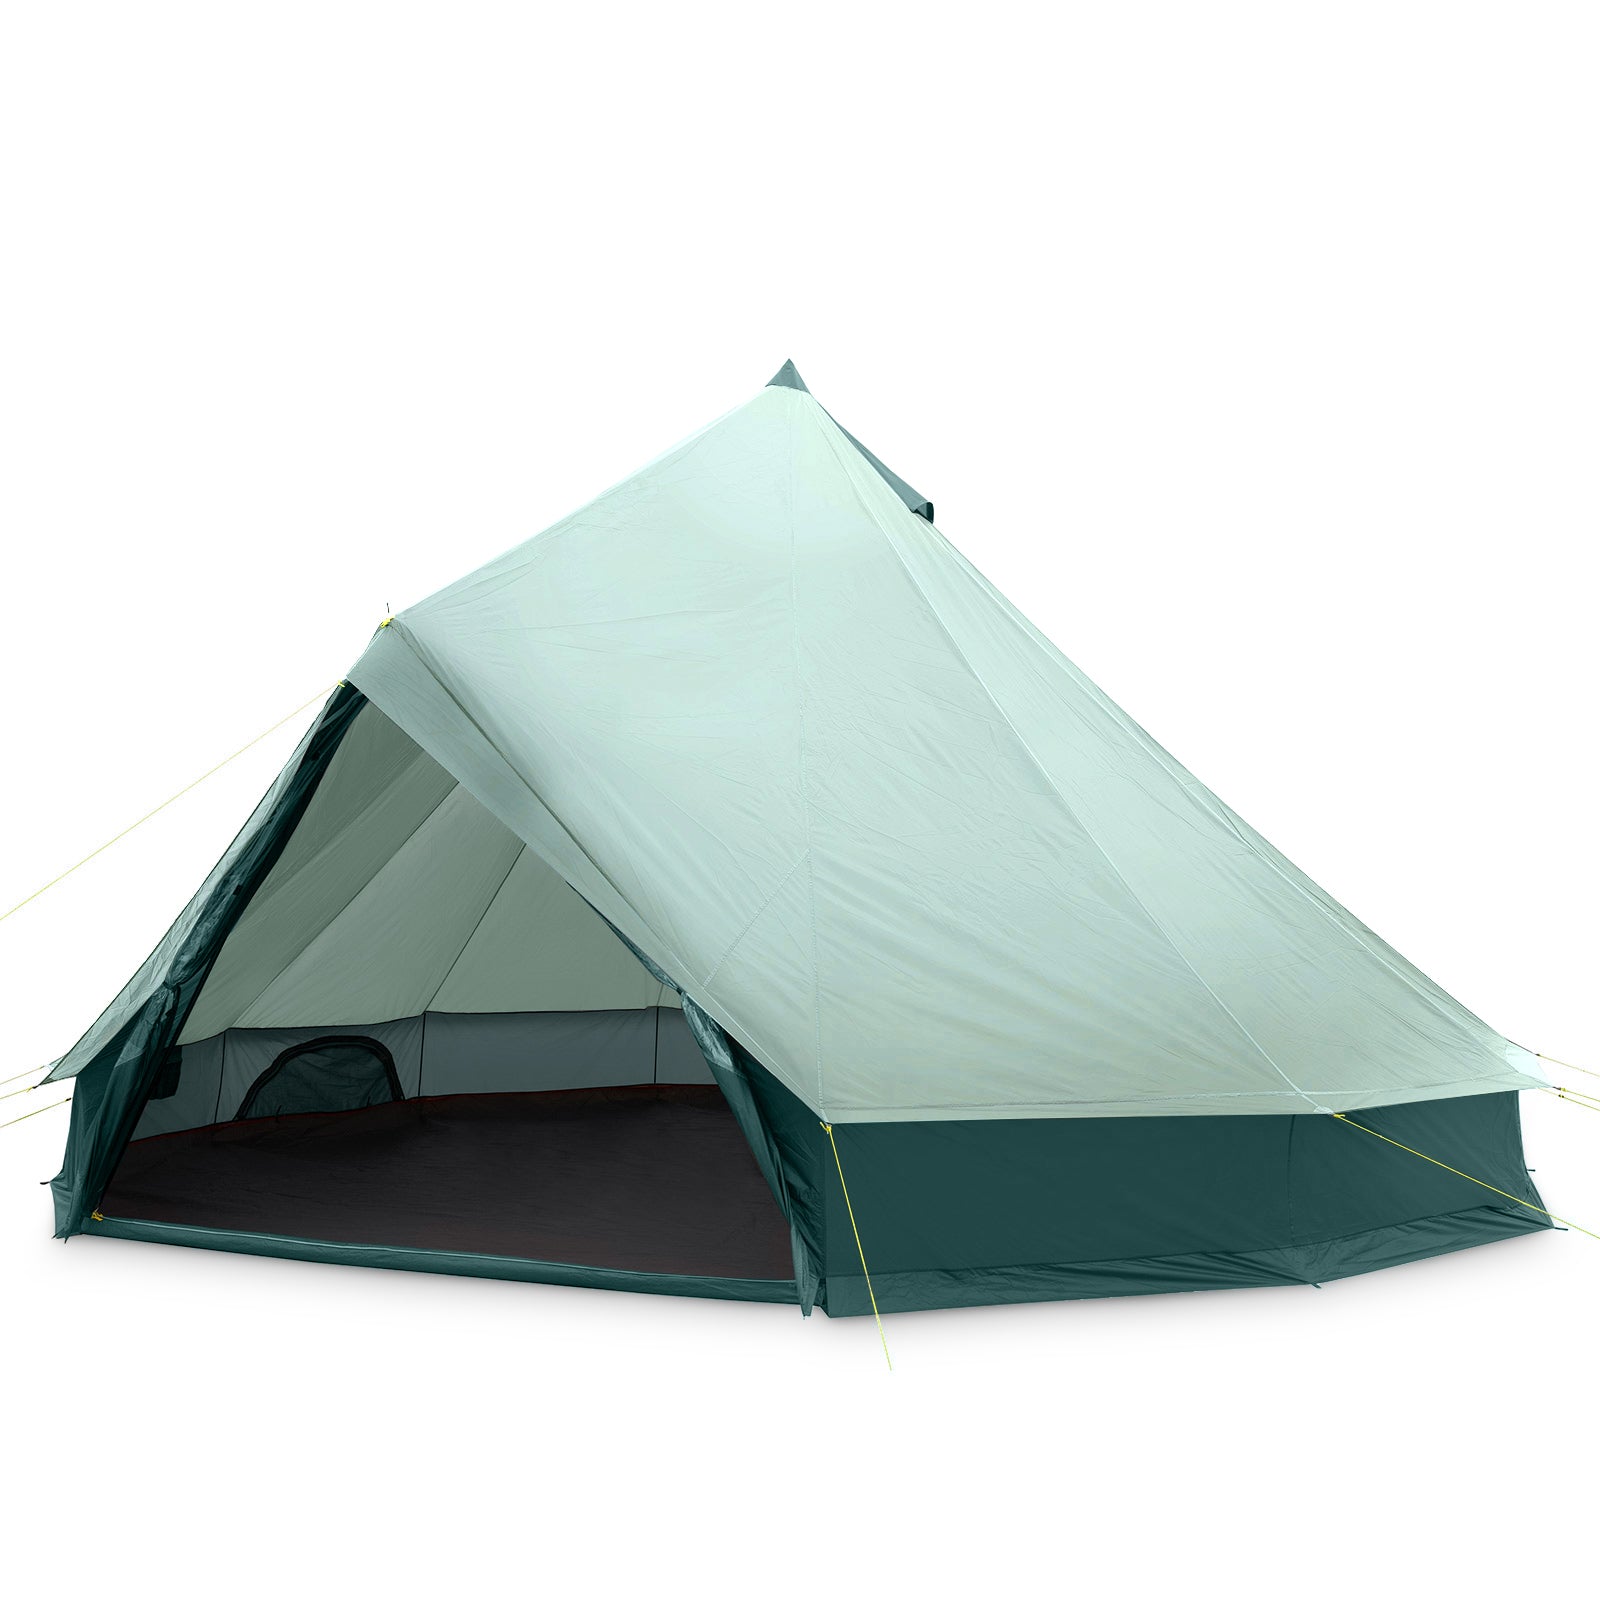 qeedo Bell, comfort group tent in tipi style